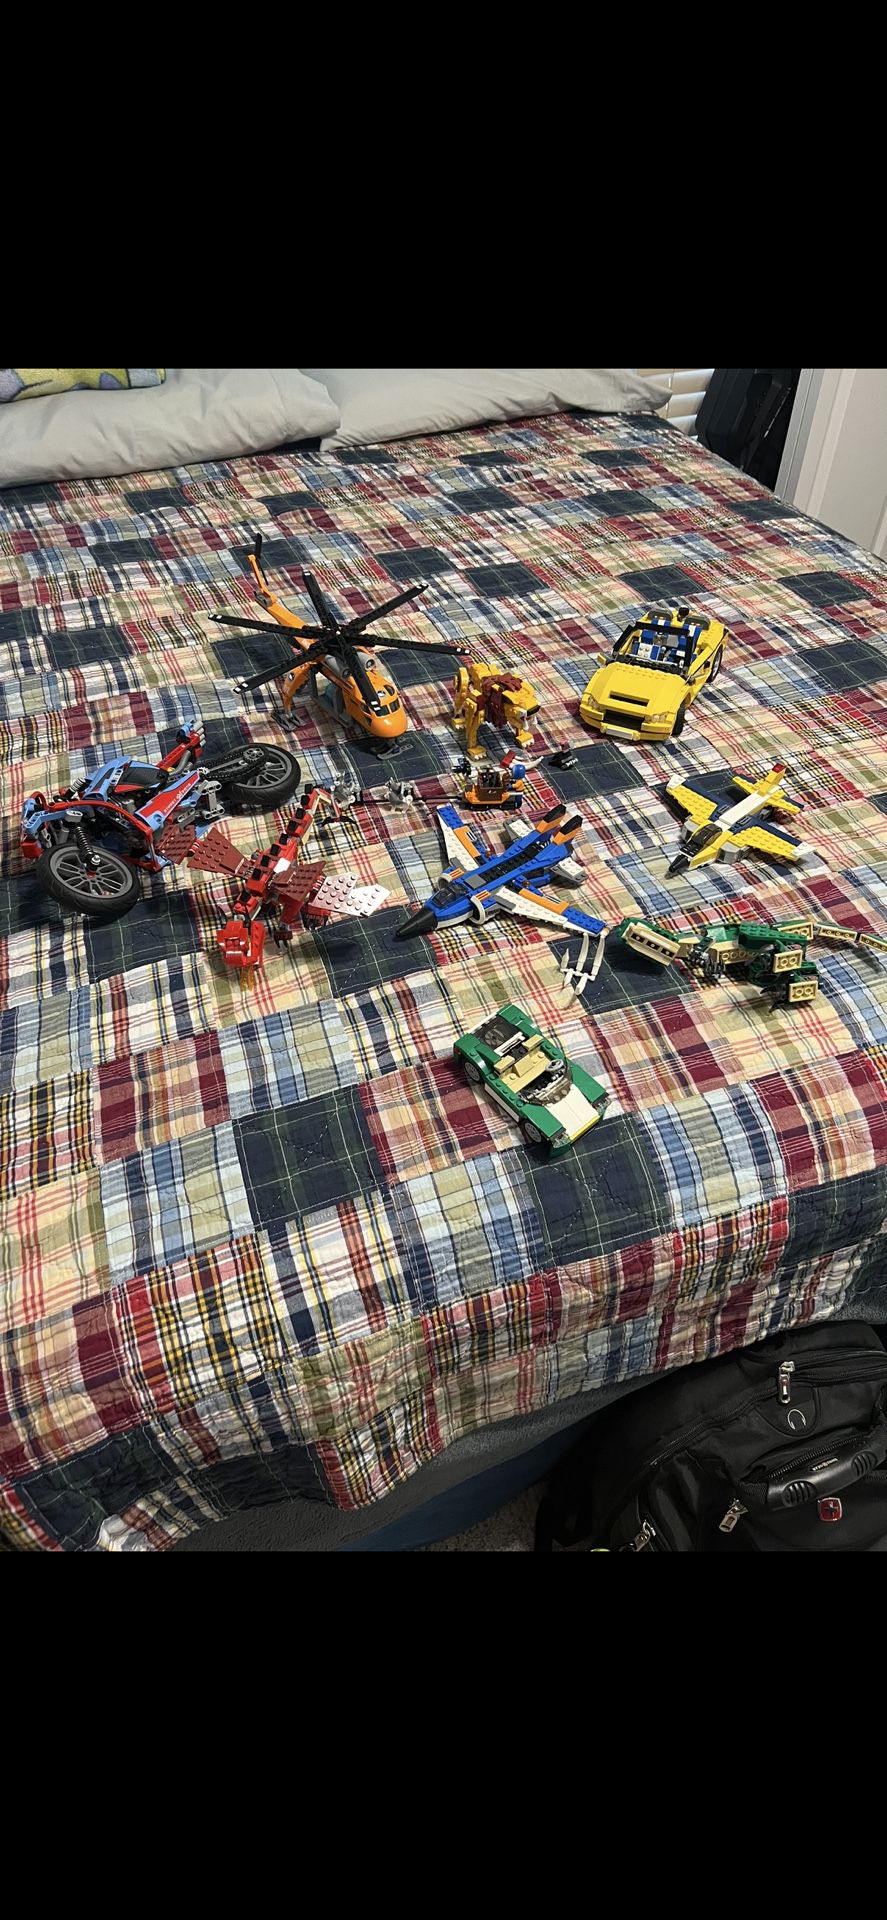 Lego Collection For Sale